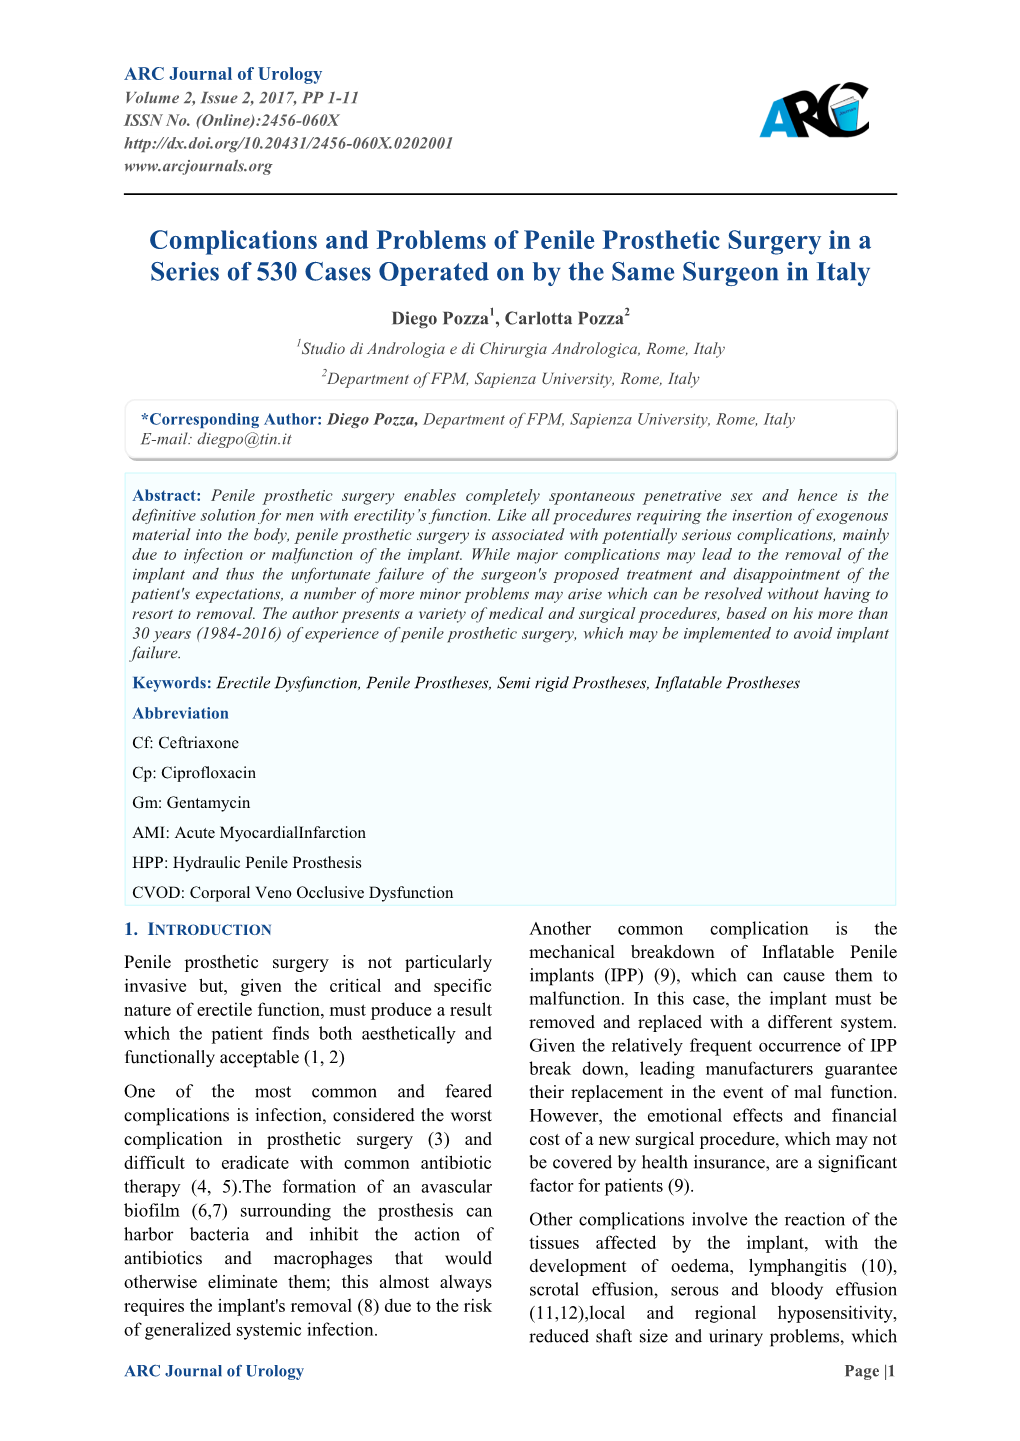 Complications and Problems of Penile Prosthetic Surgery in a Series of 530 Cases Operated on by the Same Surgeon in Italy